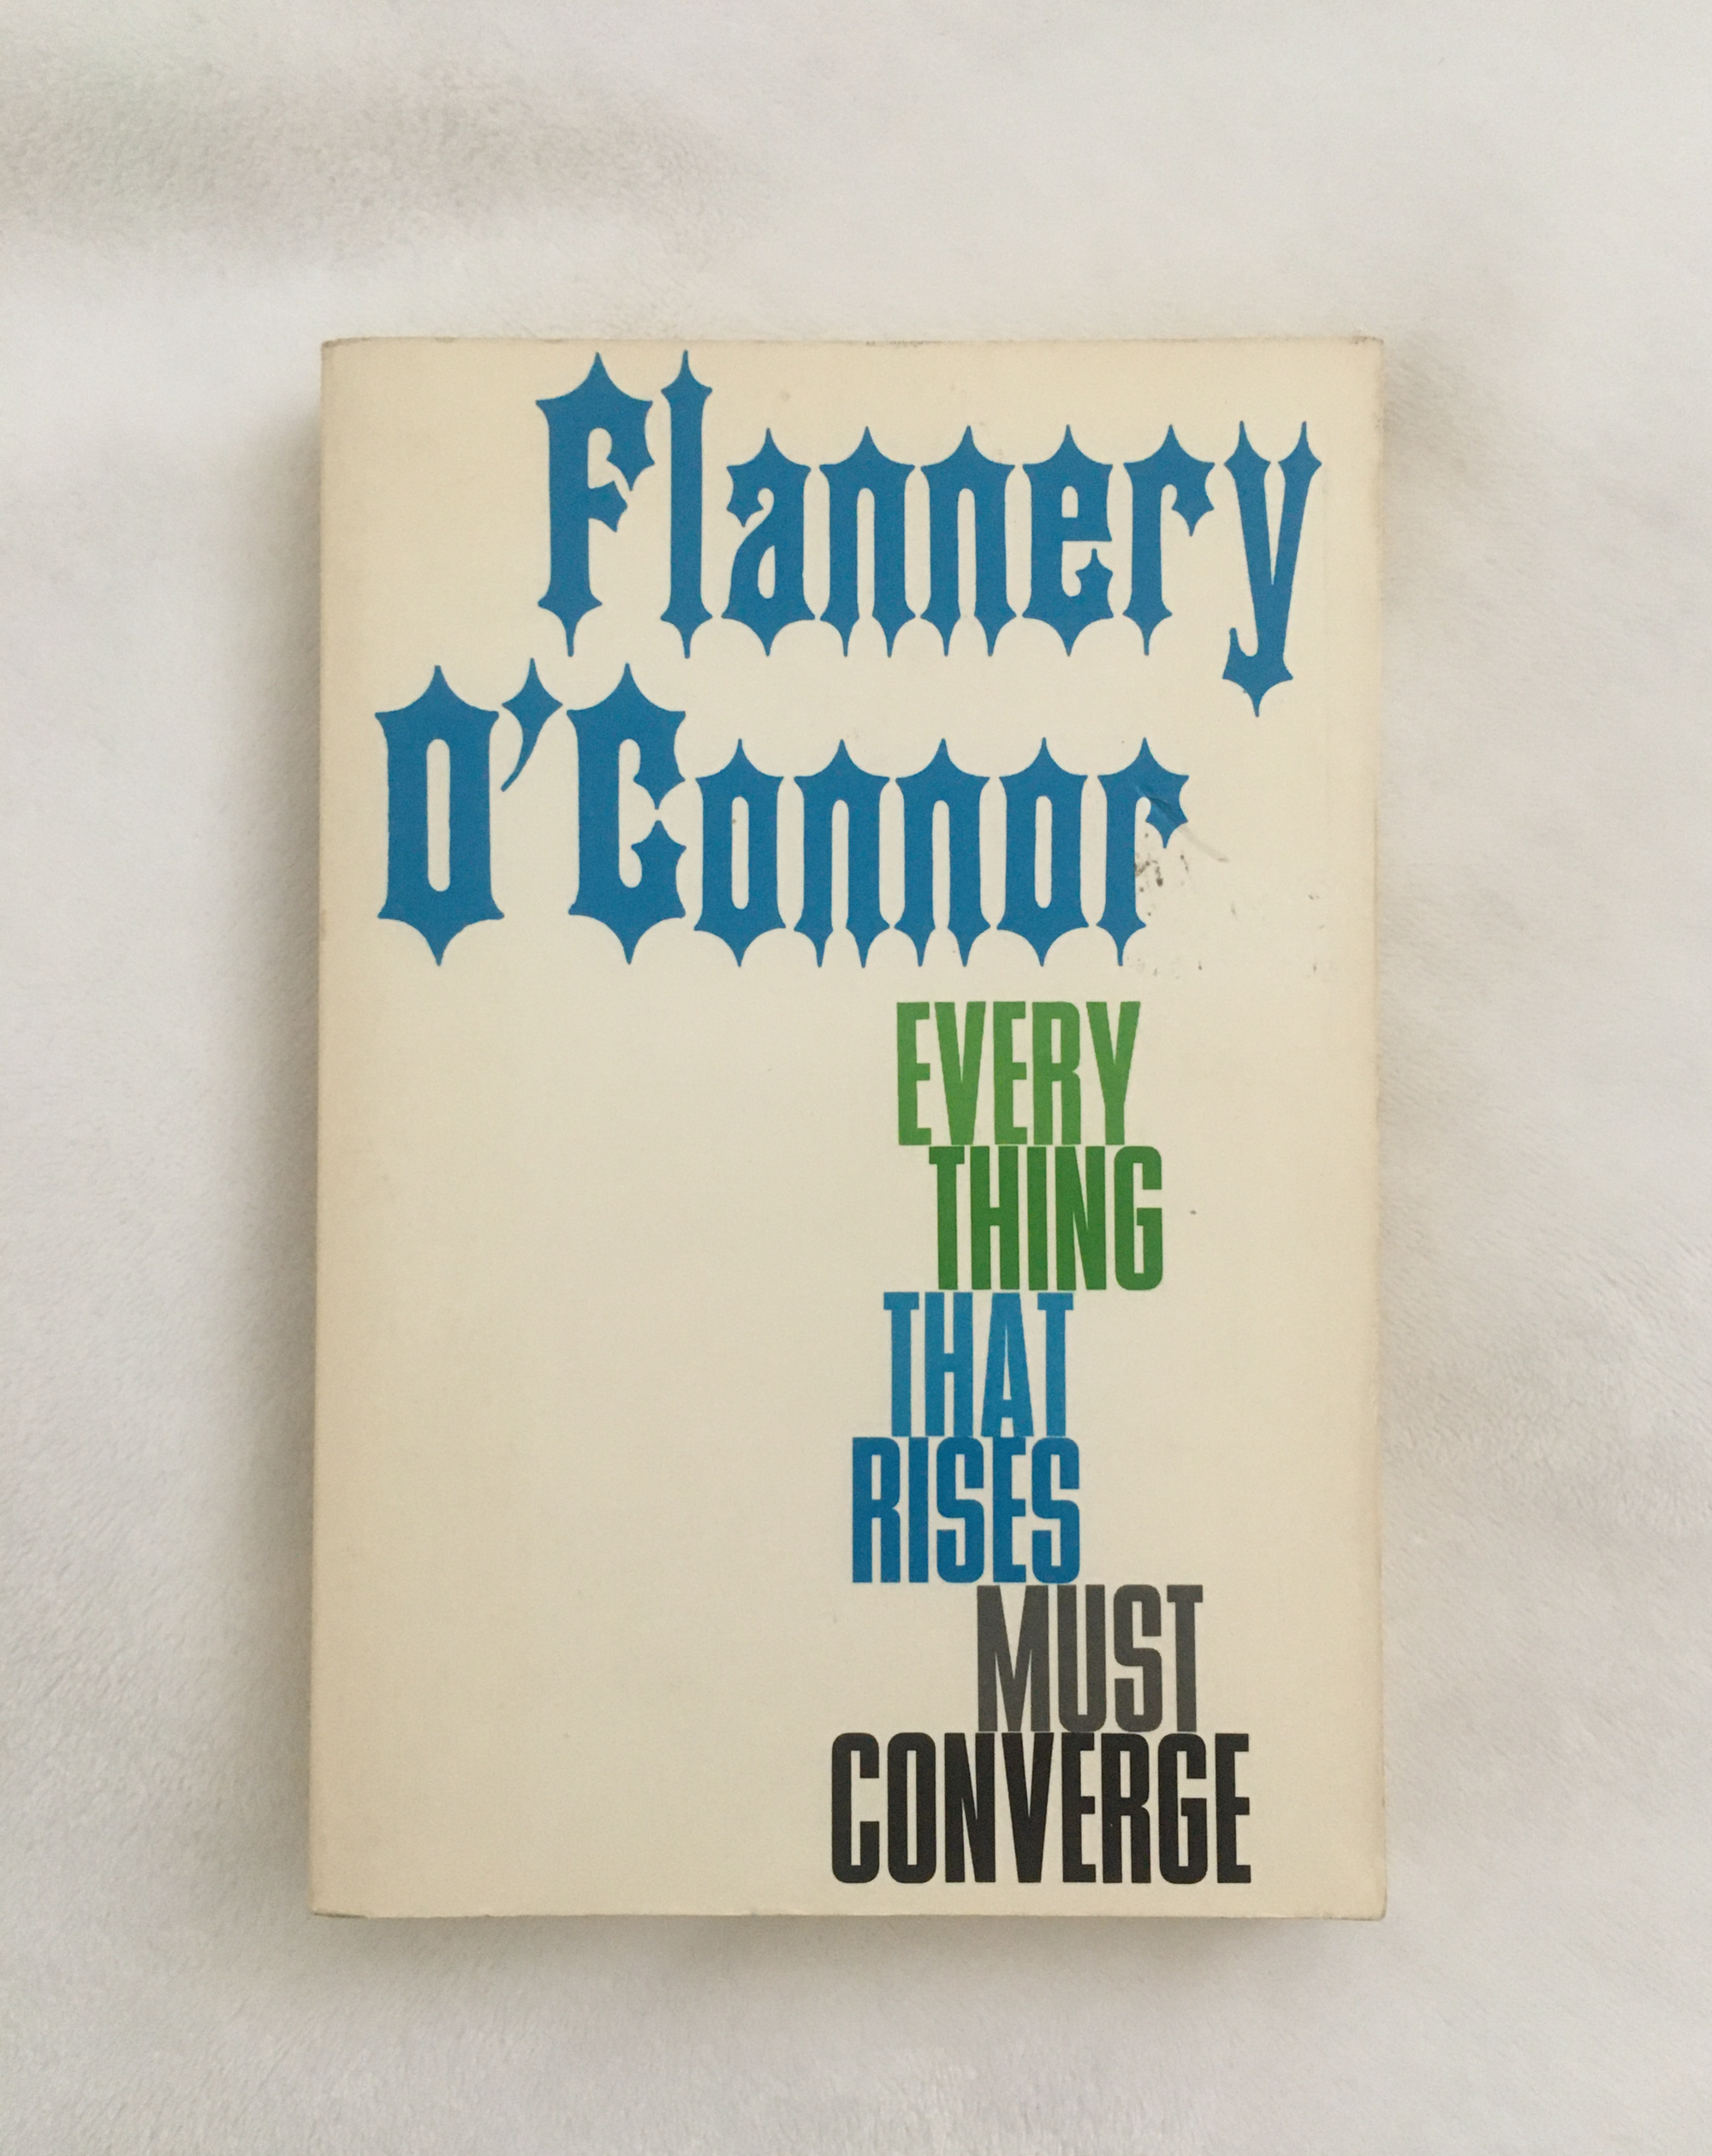 Everything that Rises Must Converge by Flannery O'Connor, book, Ten Dollar Books, Ten Dollar Books